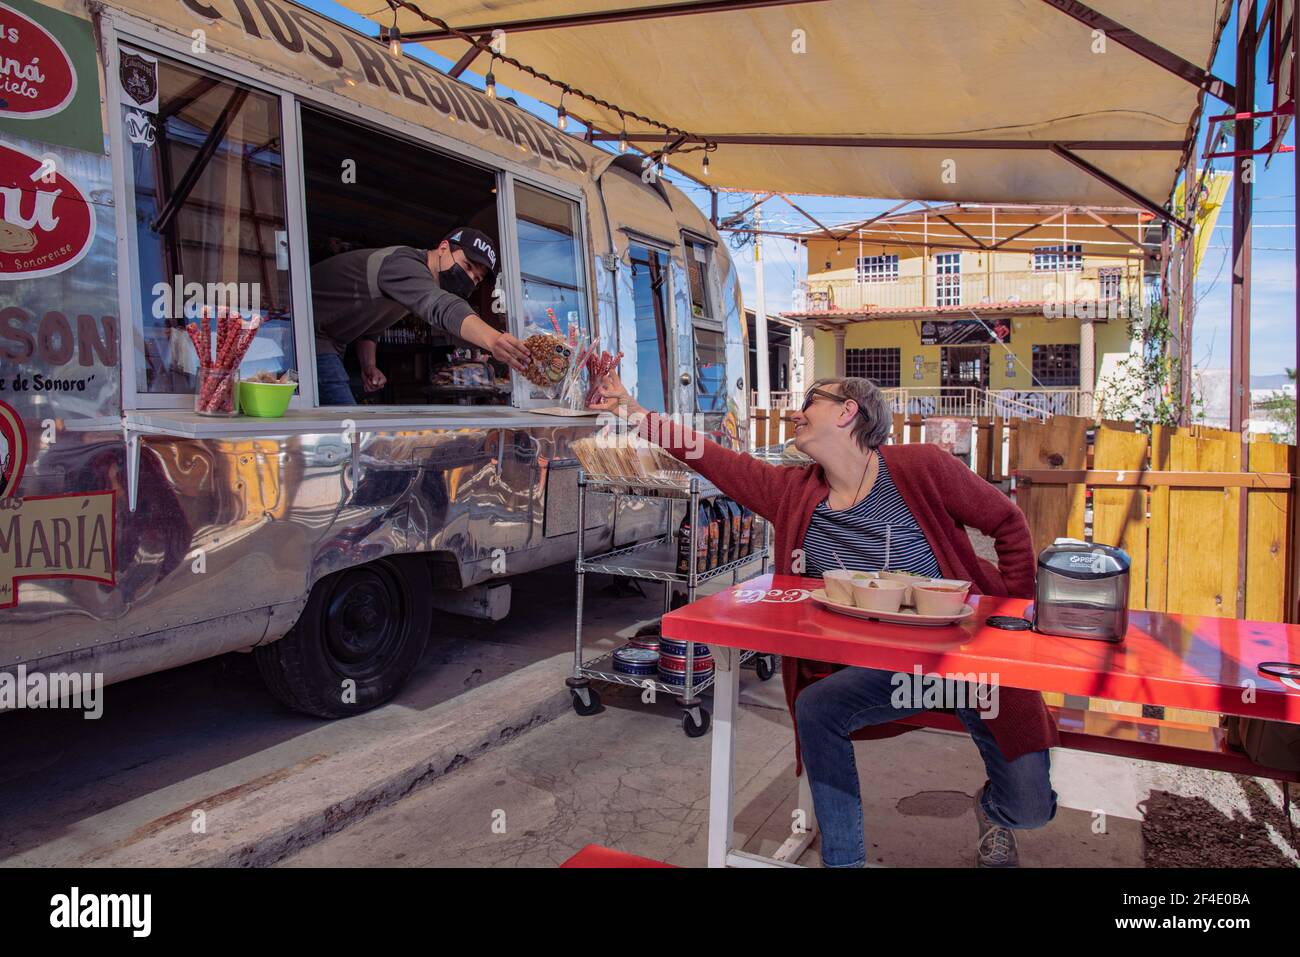 Woman sitting outside at red table reaches for candy held by employee  in a food truck in Santa Ana, Sonora, Mexico. Stock Photo